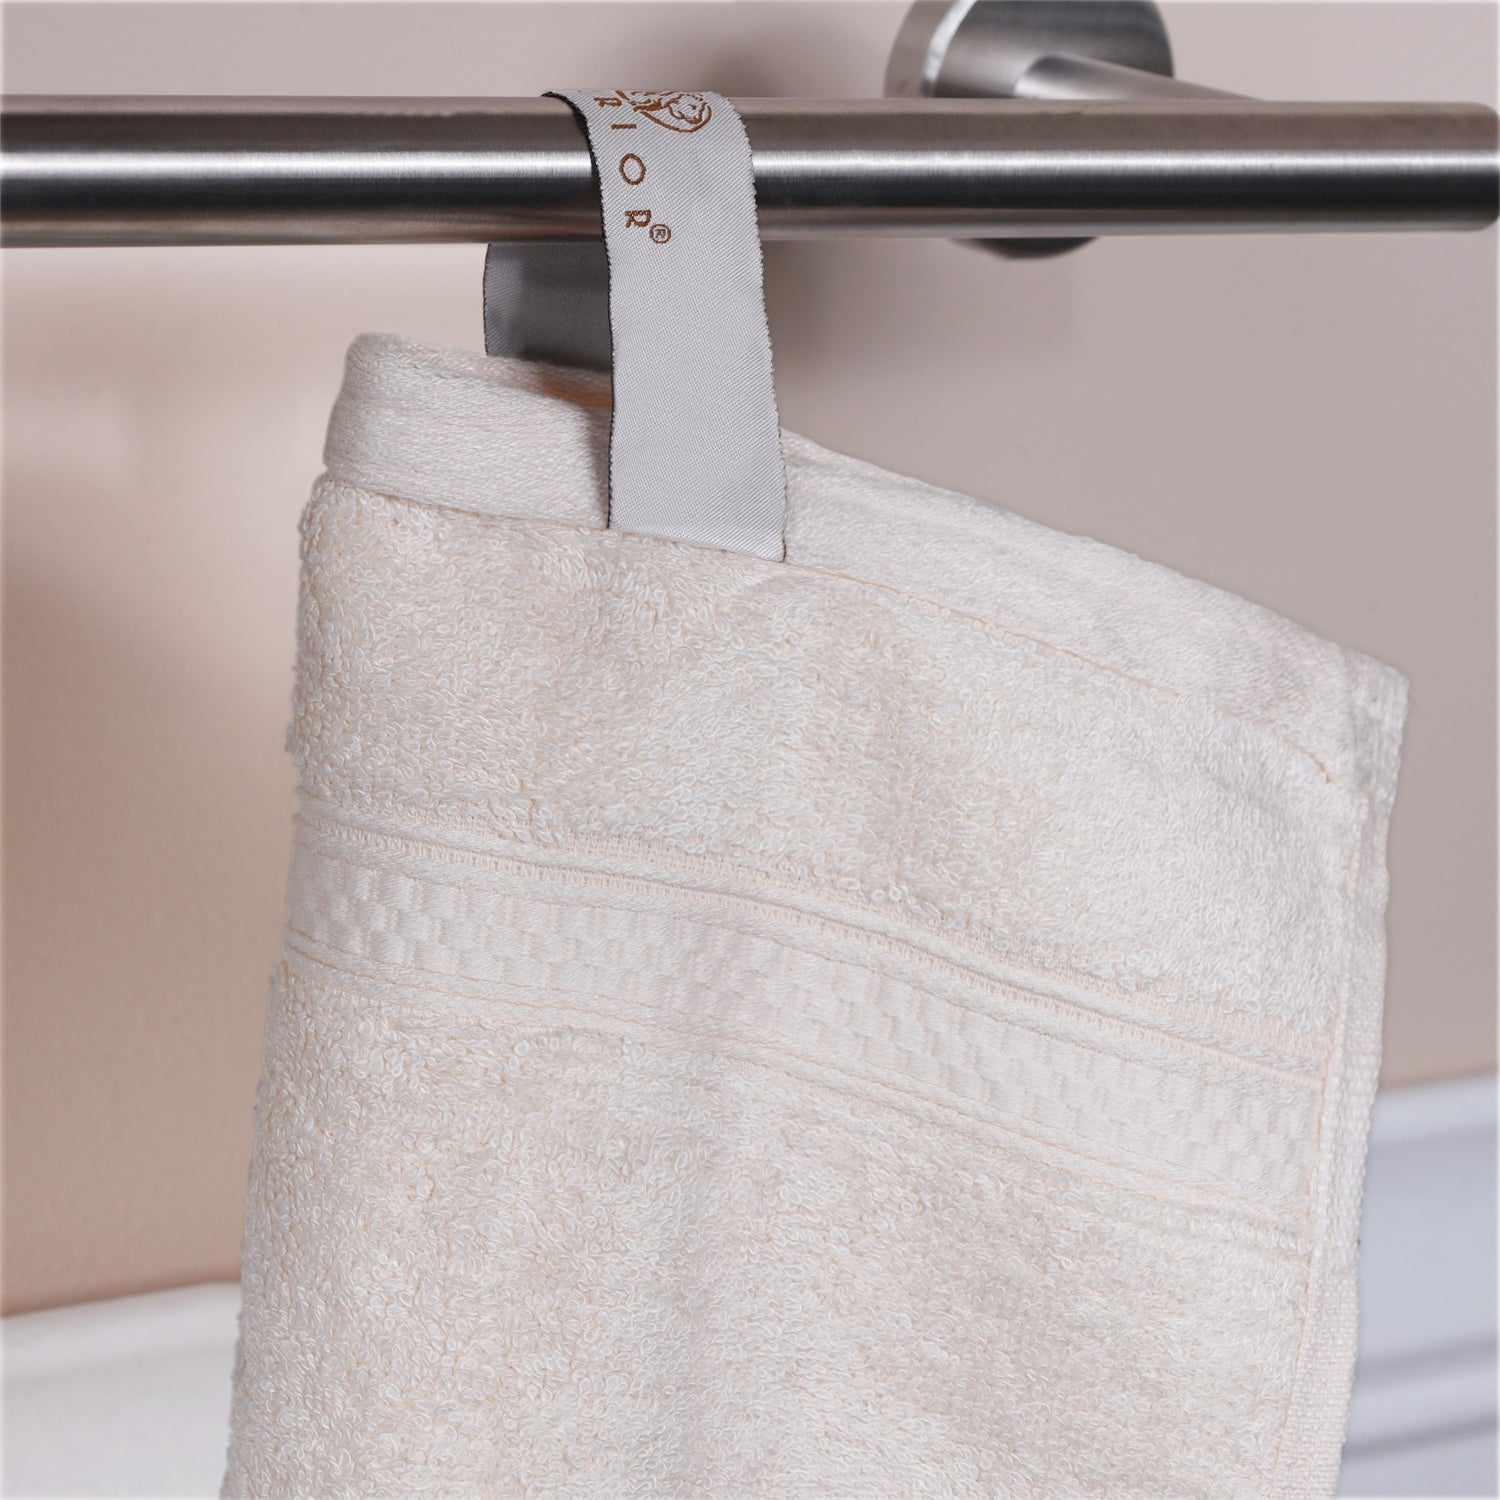  Ultra-Soft Hypoallergenic Rayon from Bamboo Cotton Blend Bath and Hand Towel Set -  Ivory